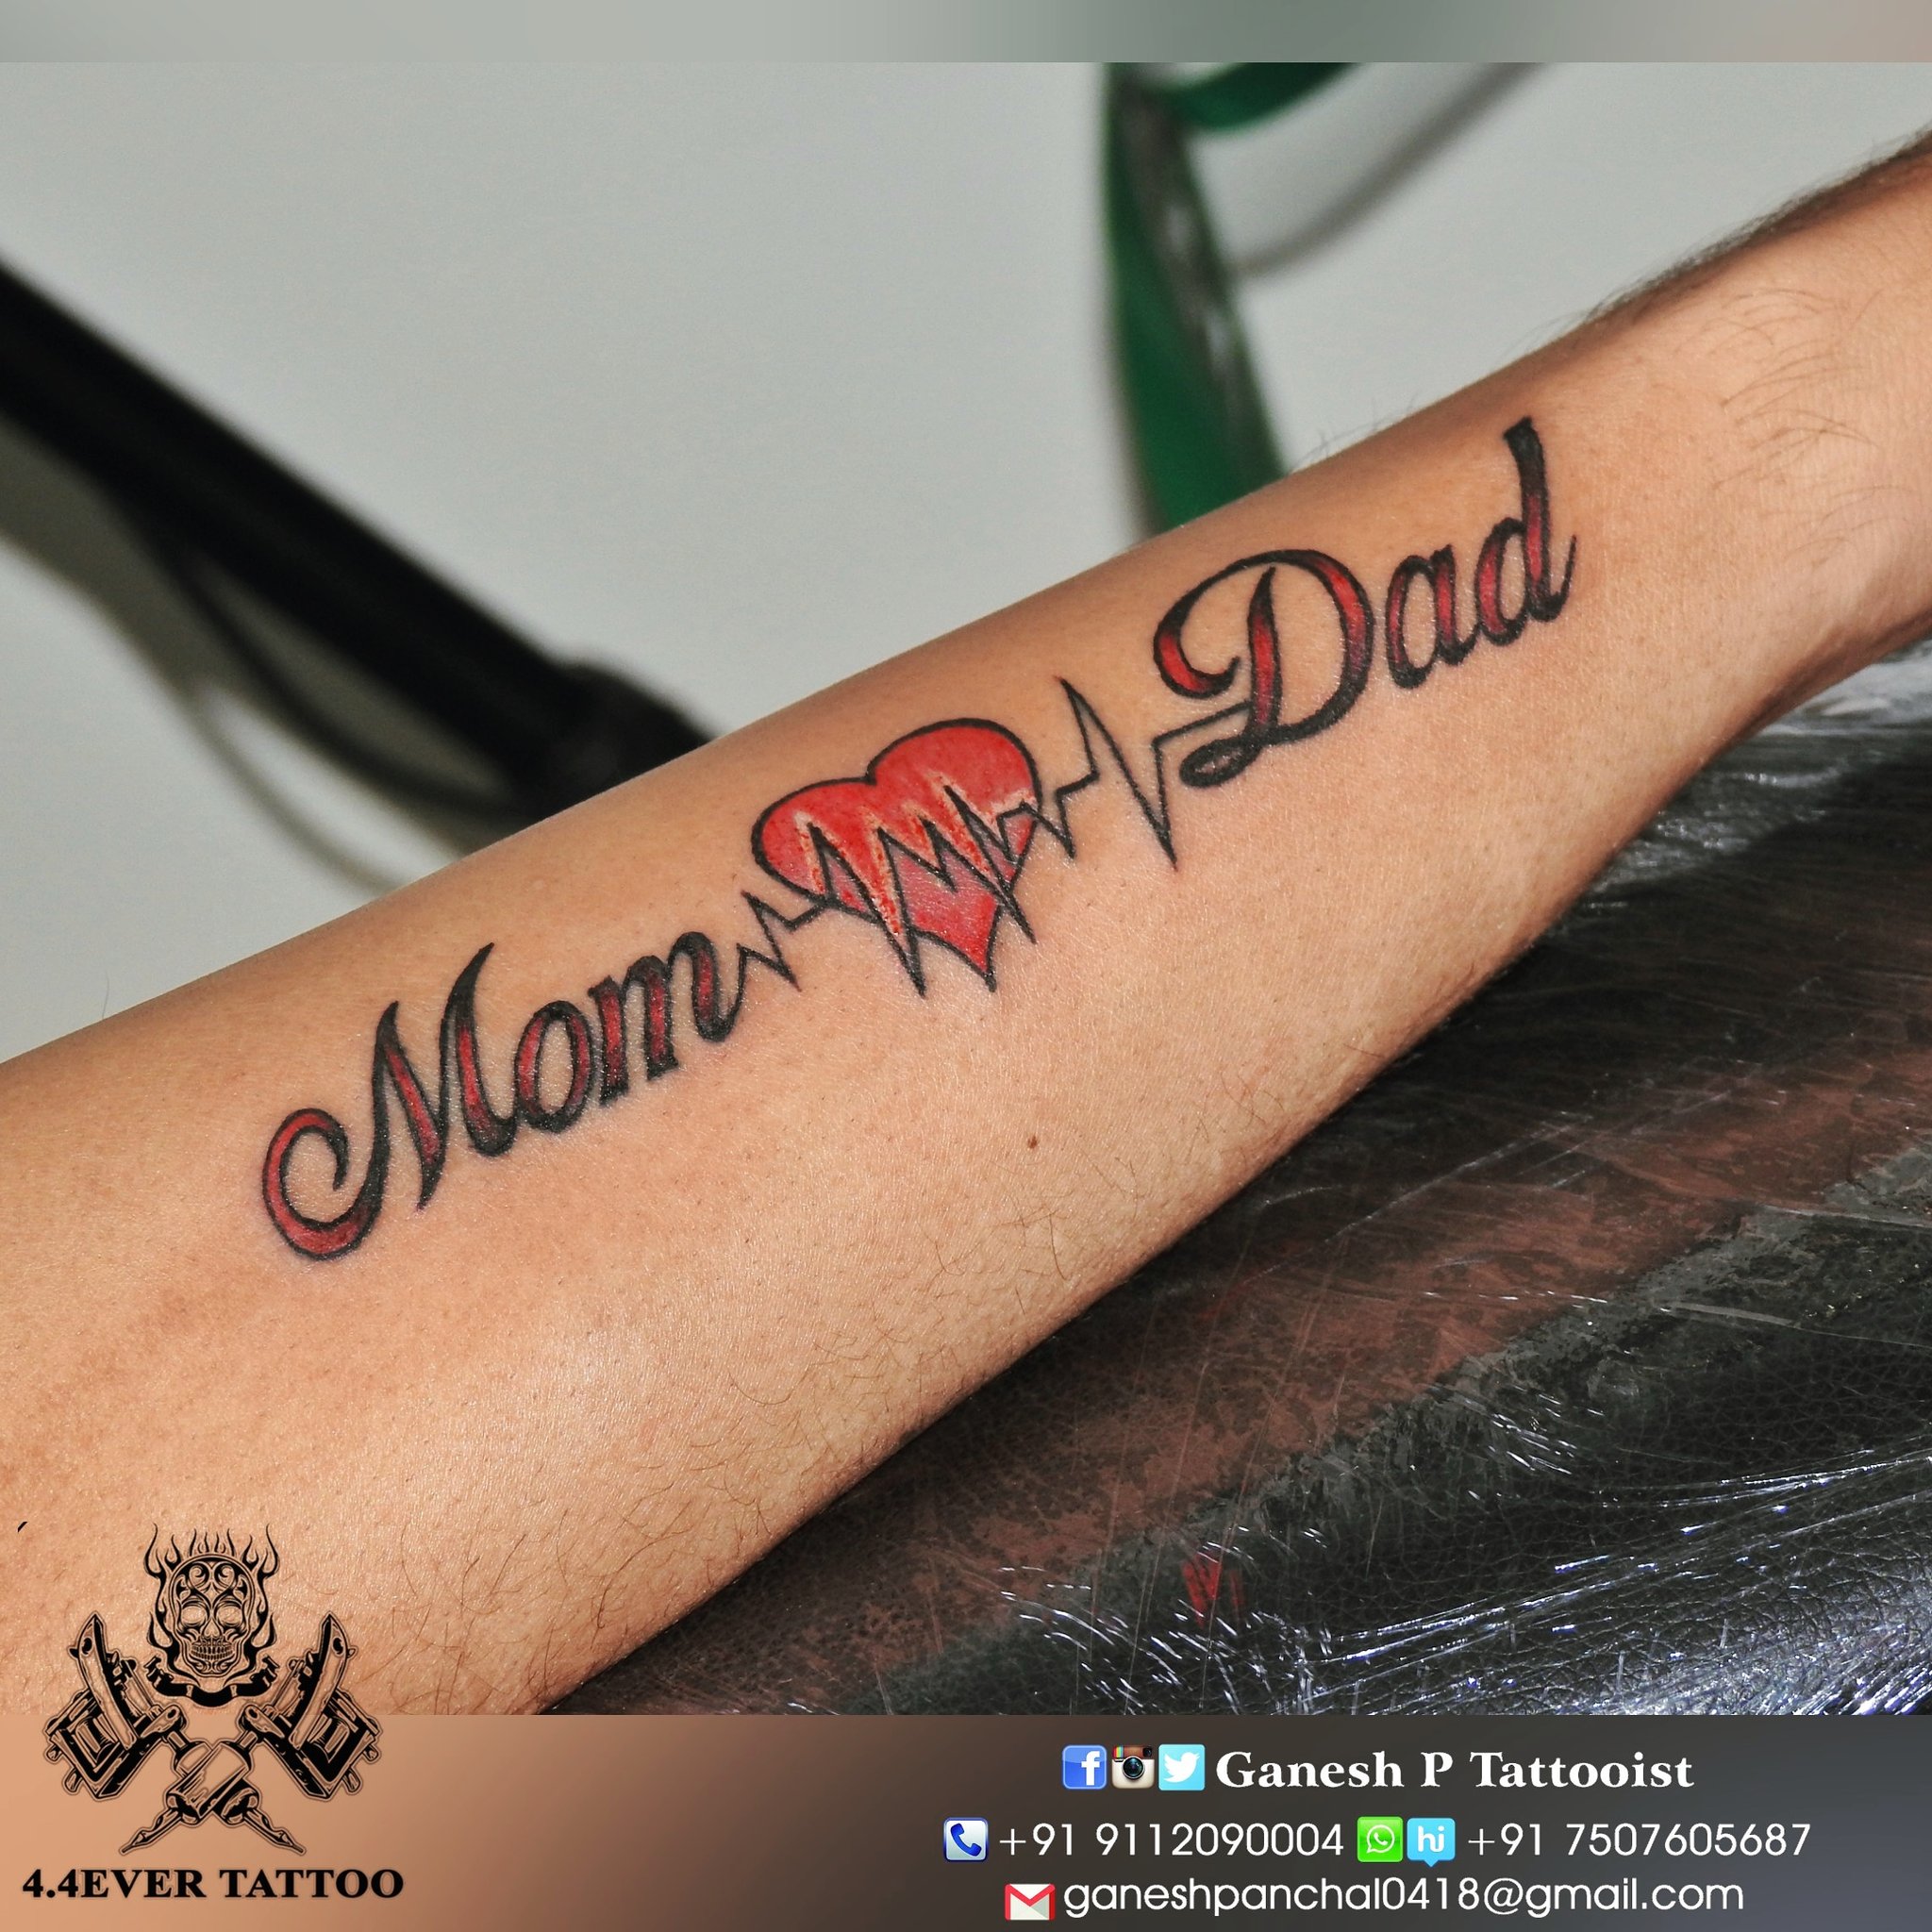 Share 92+ about love p tattoo best .vn